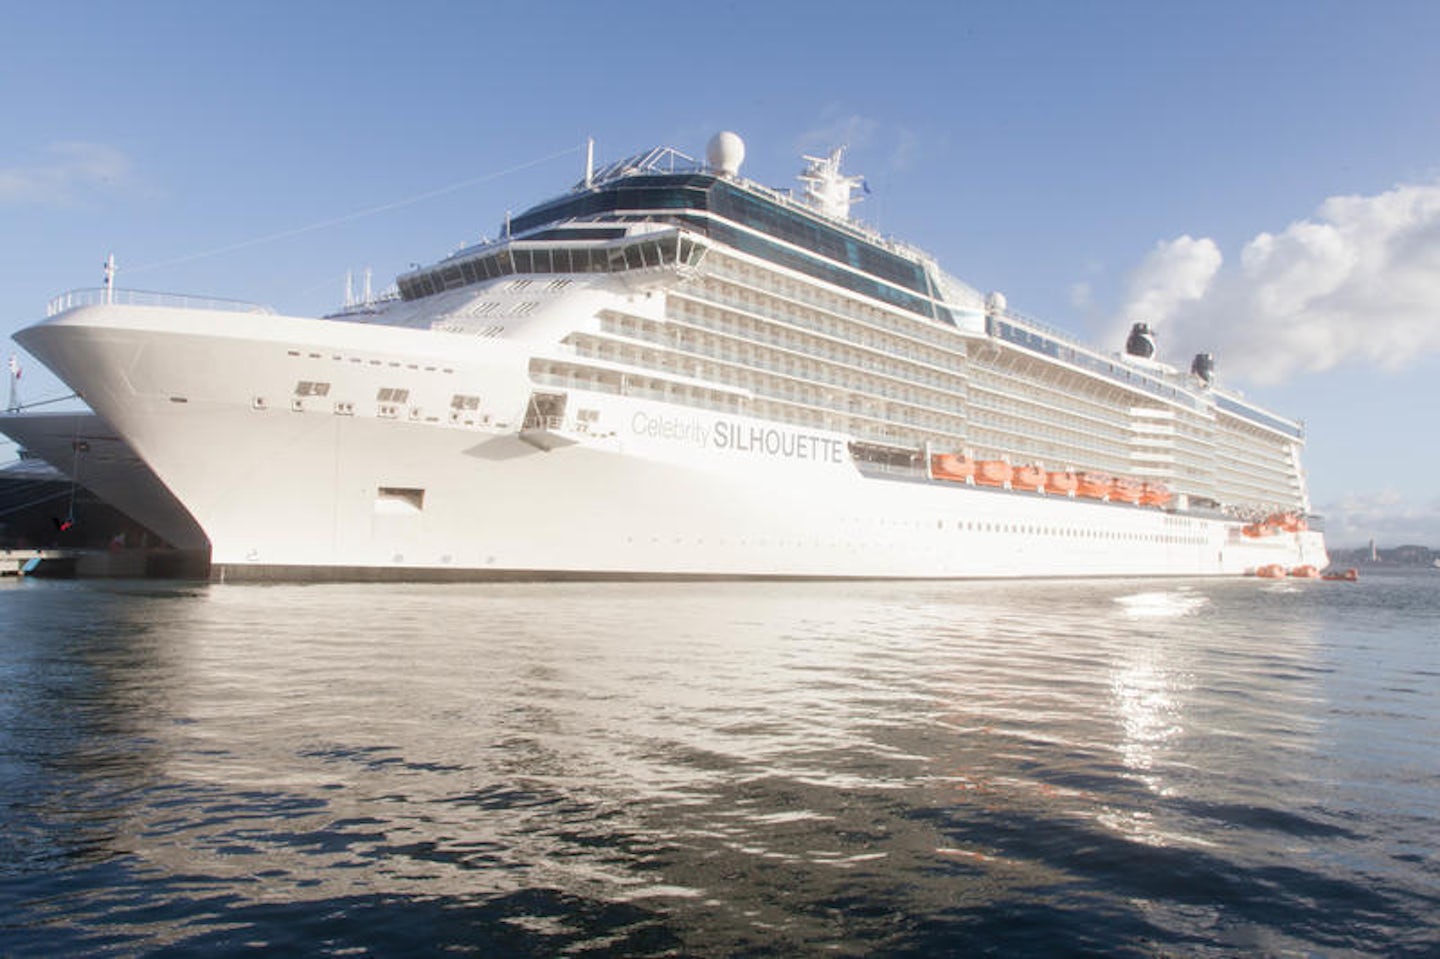 planet cruise celebrity silhouette